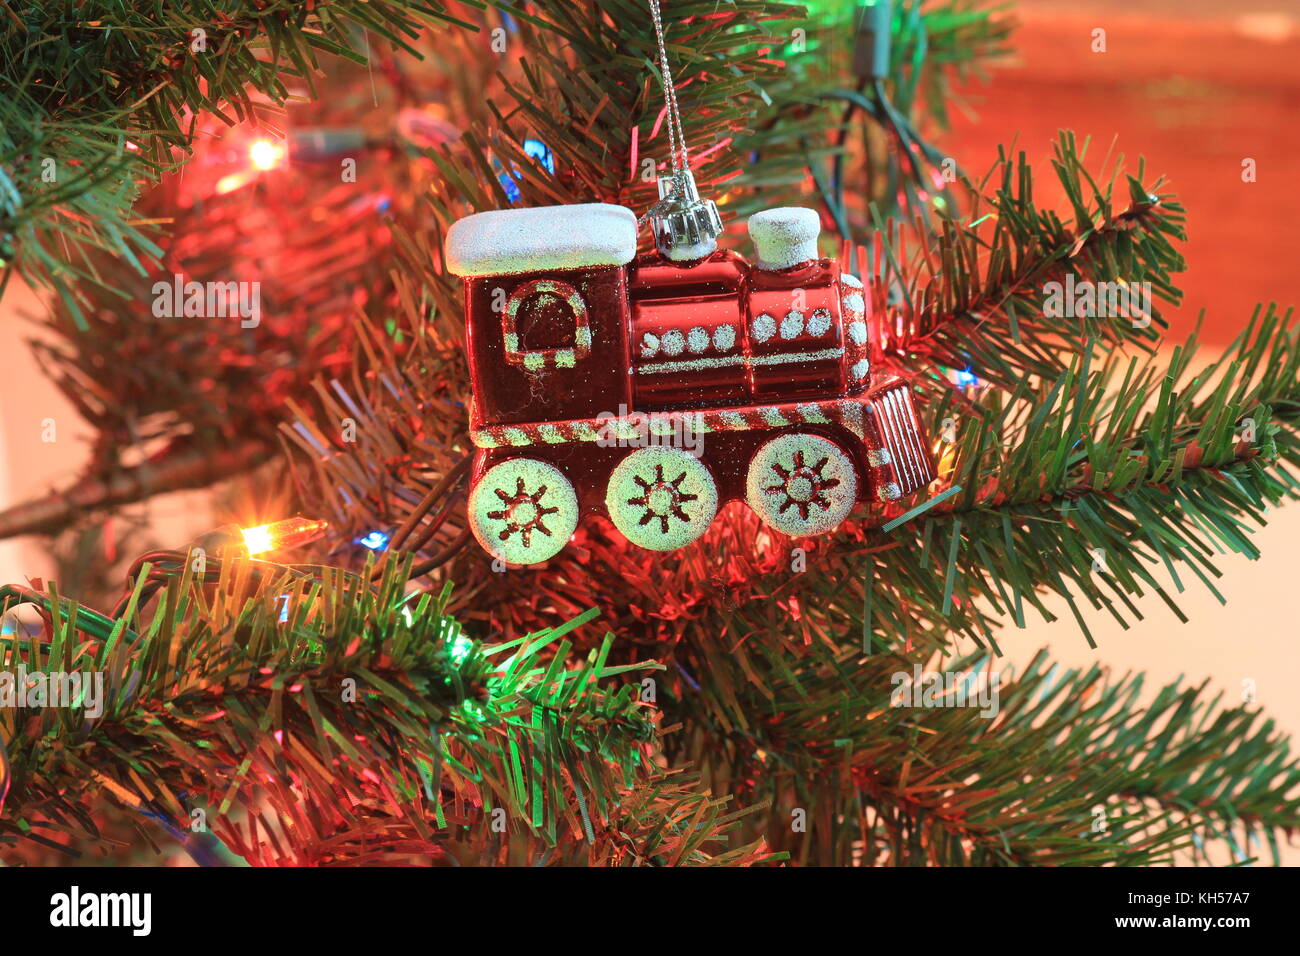 A Red Train Engine Ornament close up on a Christmas tree with Lights. Stock Photo